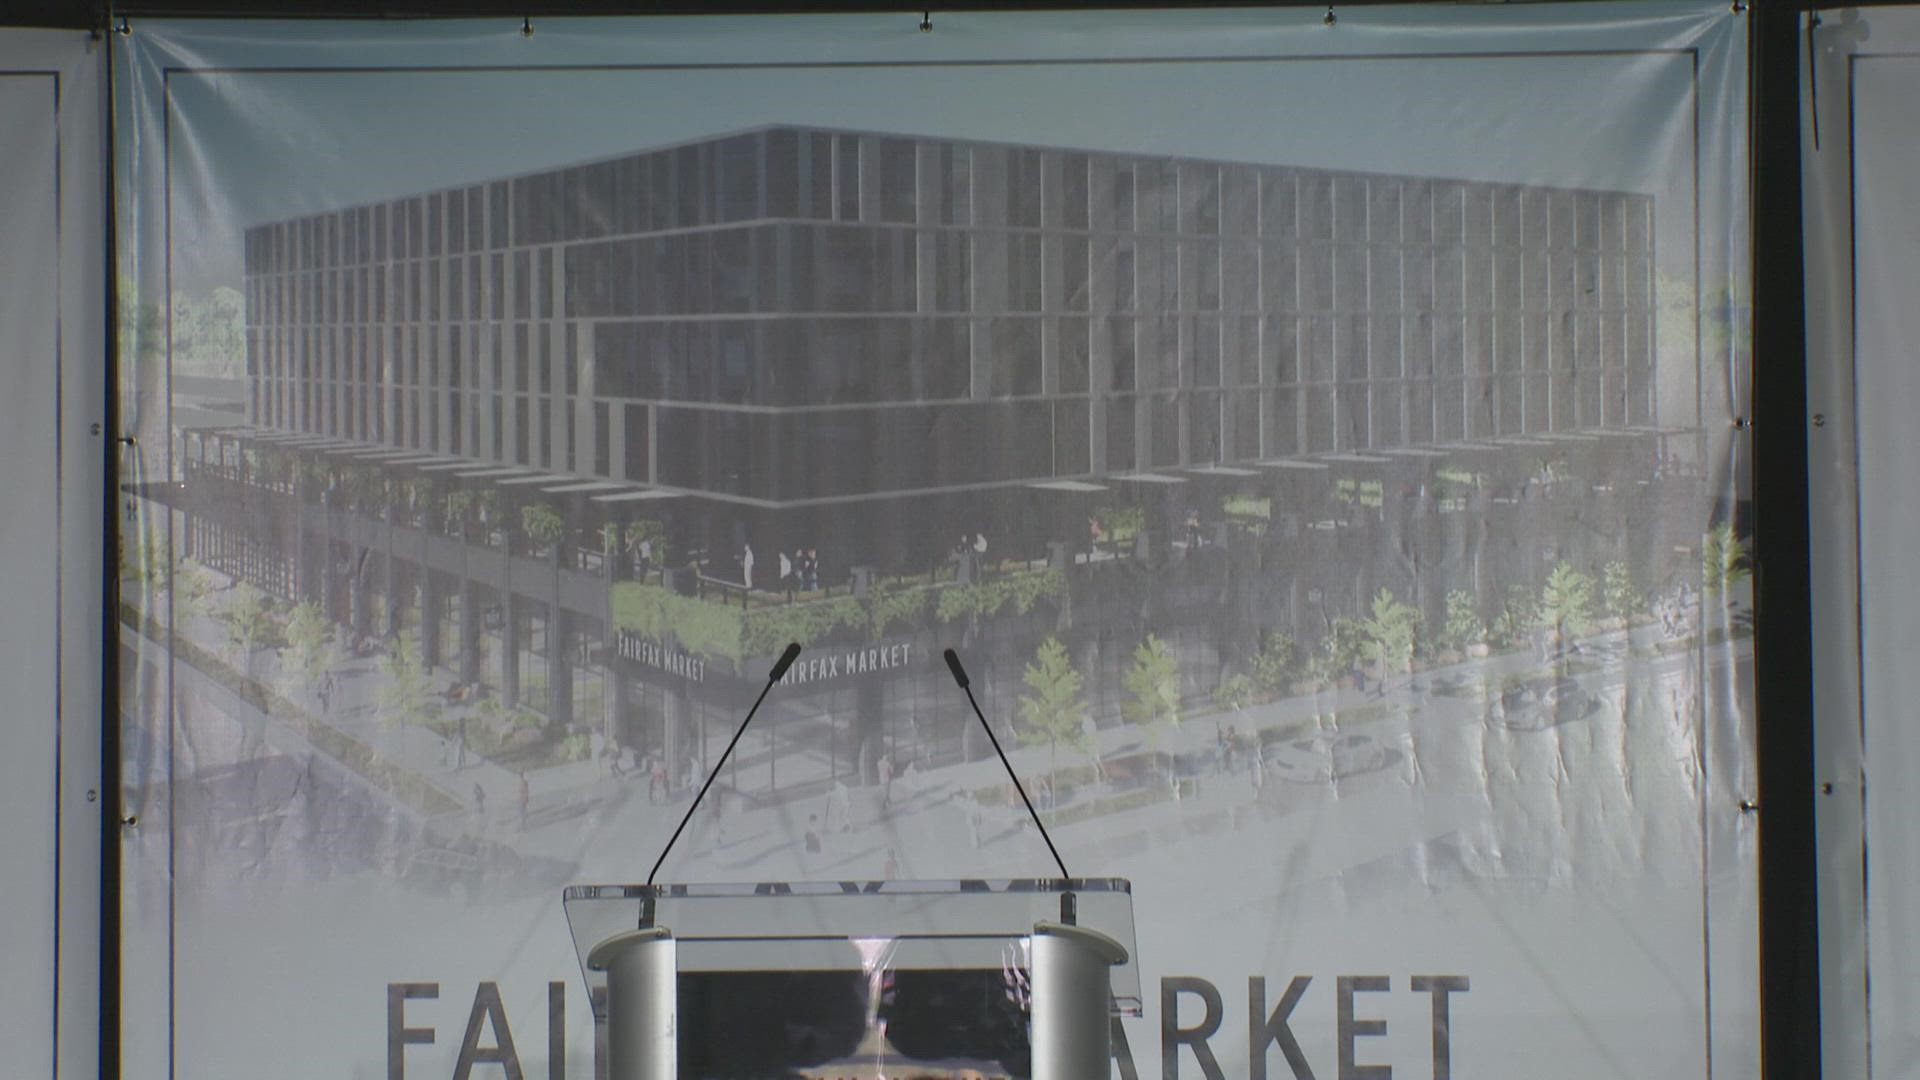 Ground was broken on Tuesday for a new grocery market and apartment complex in the Fairfax neighborhood of Cleveland. It could open by 2023.